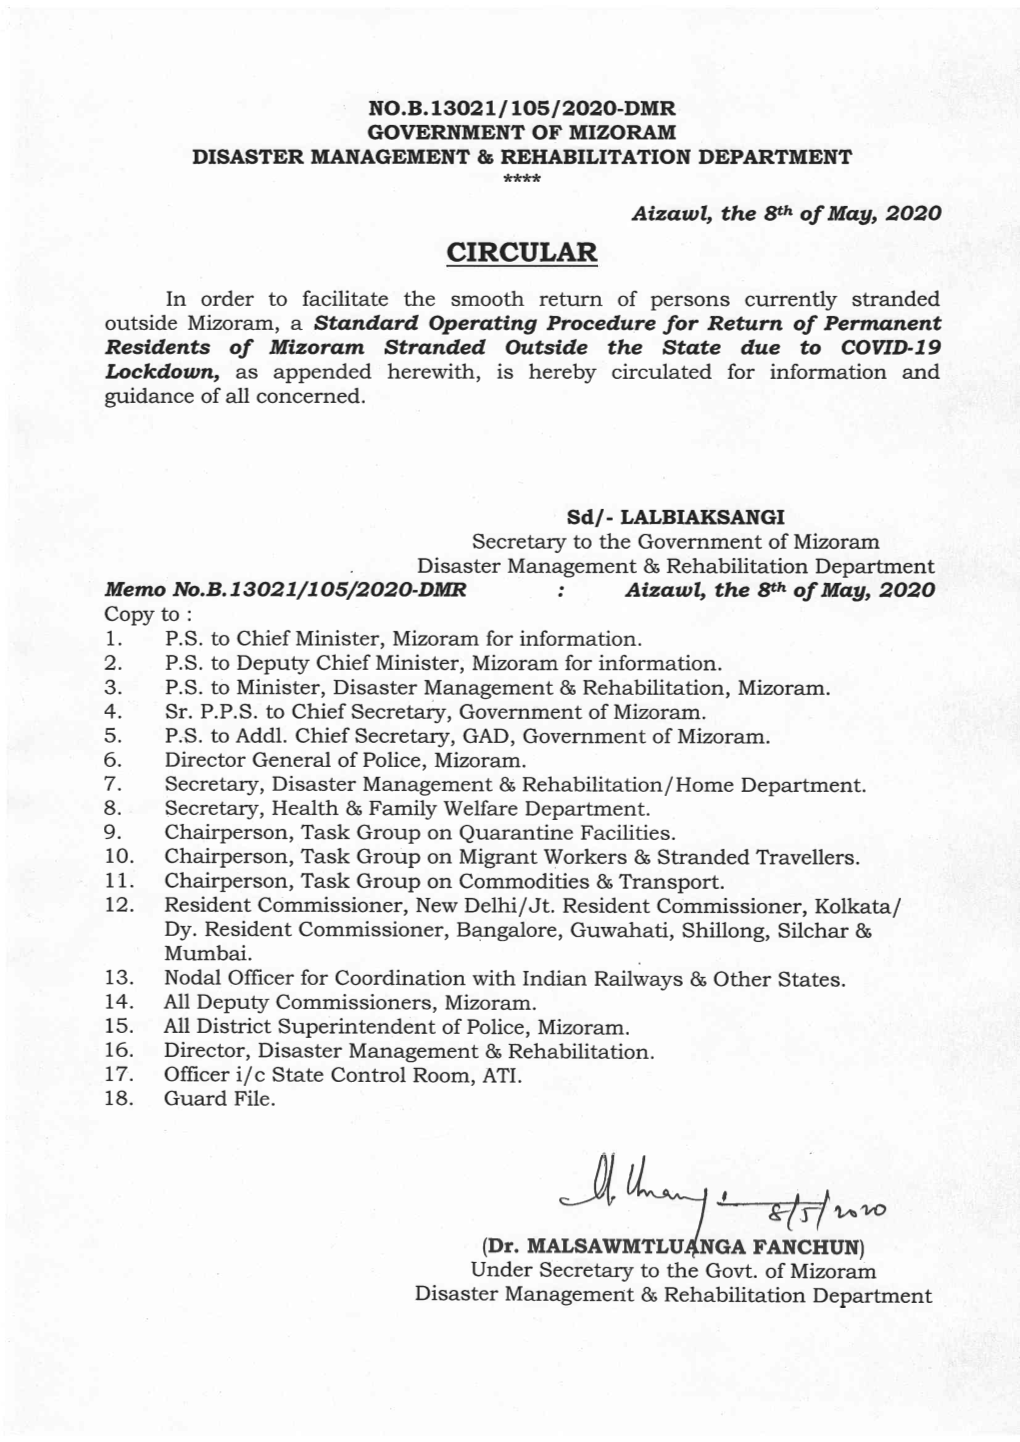 CIRCULAR in Order to Facilitate the Smooth Return of Persons Currently Stranded Outside Mizoram, a Stand.Ard